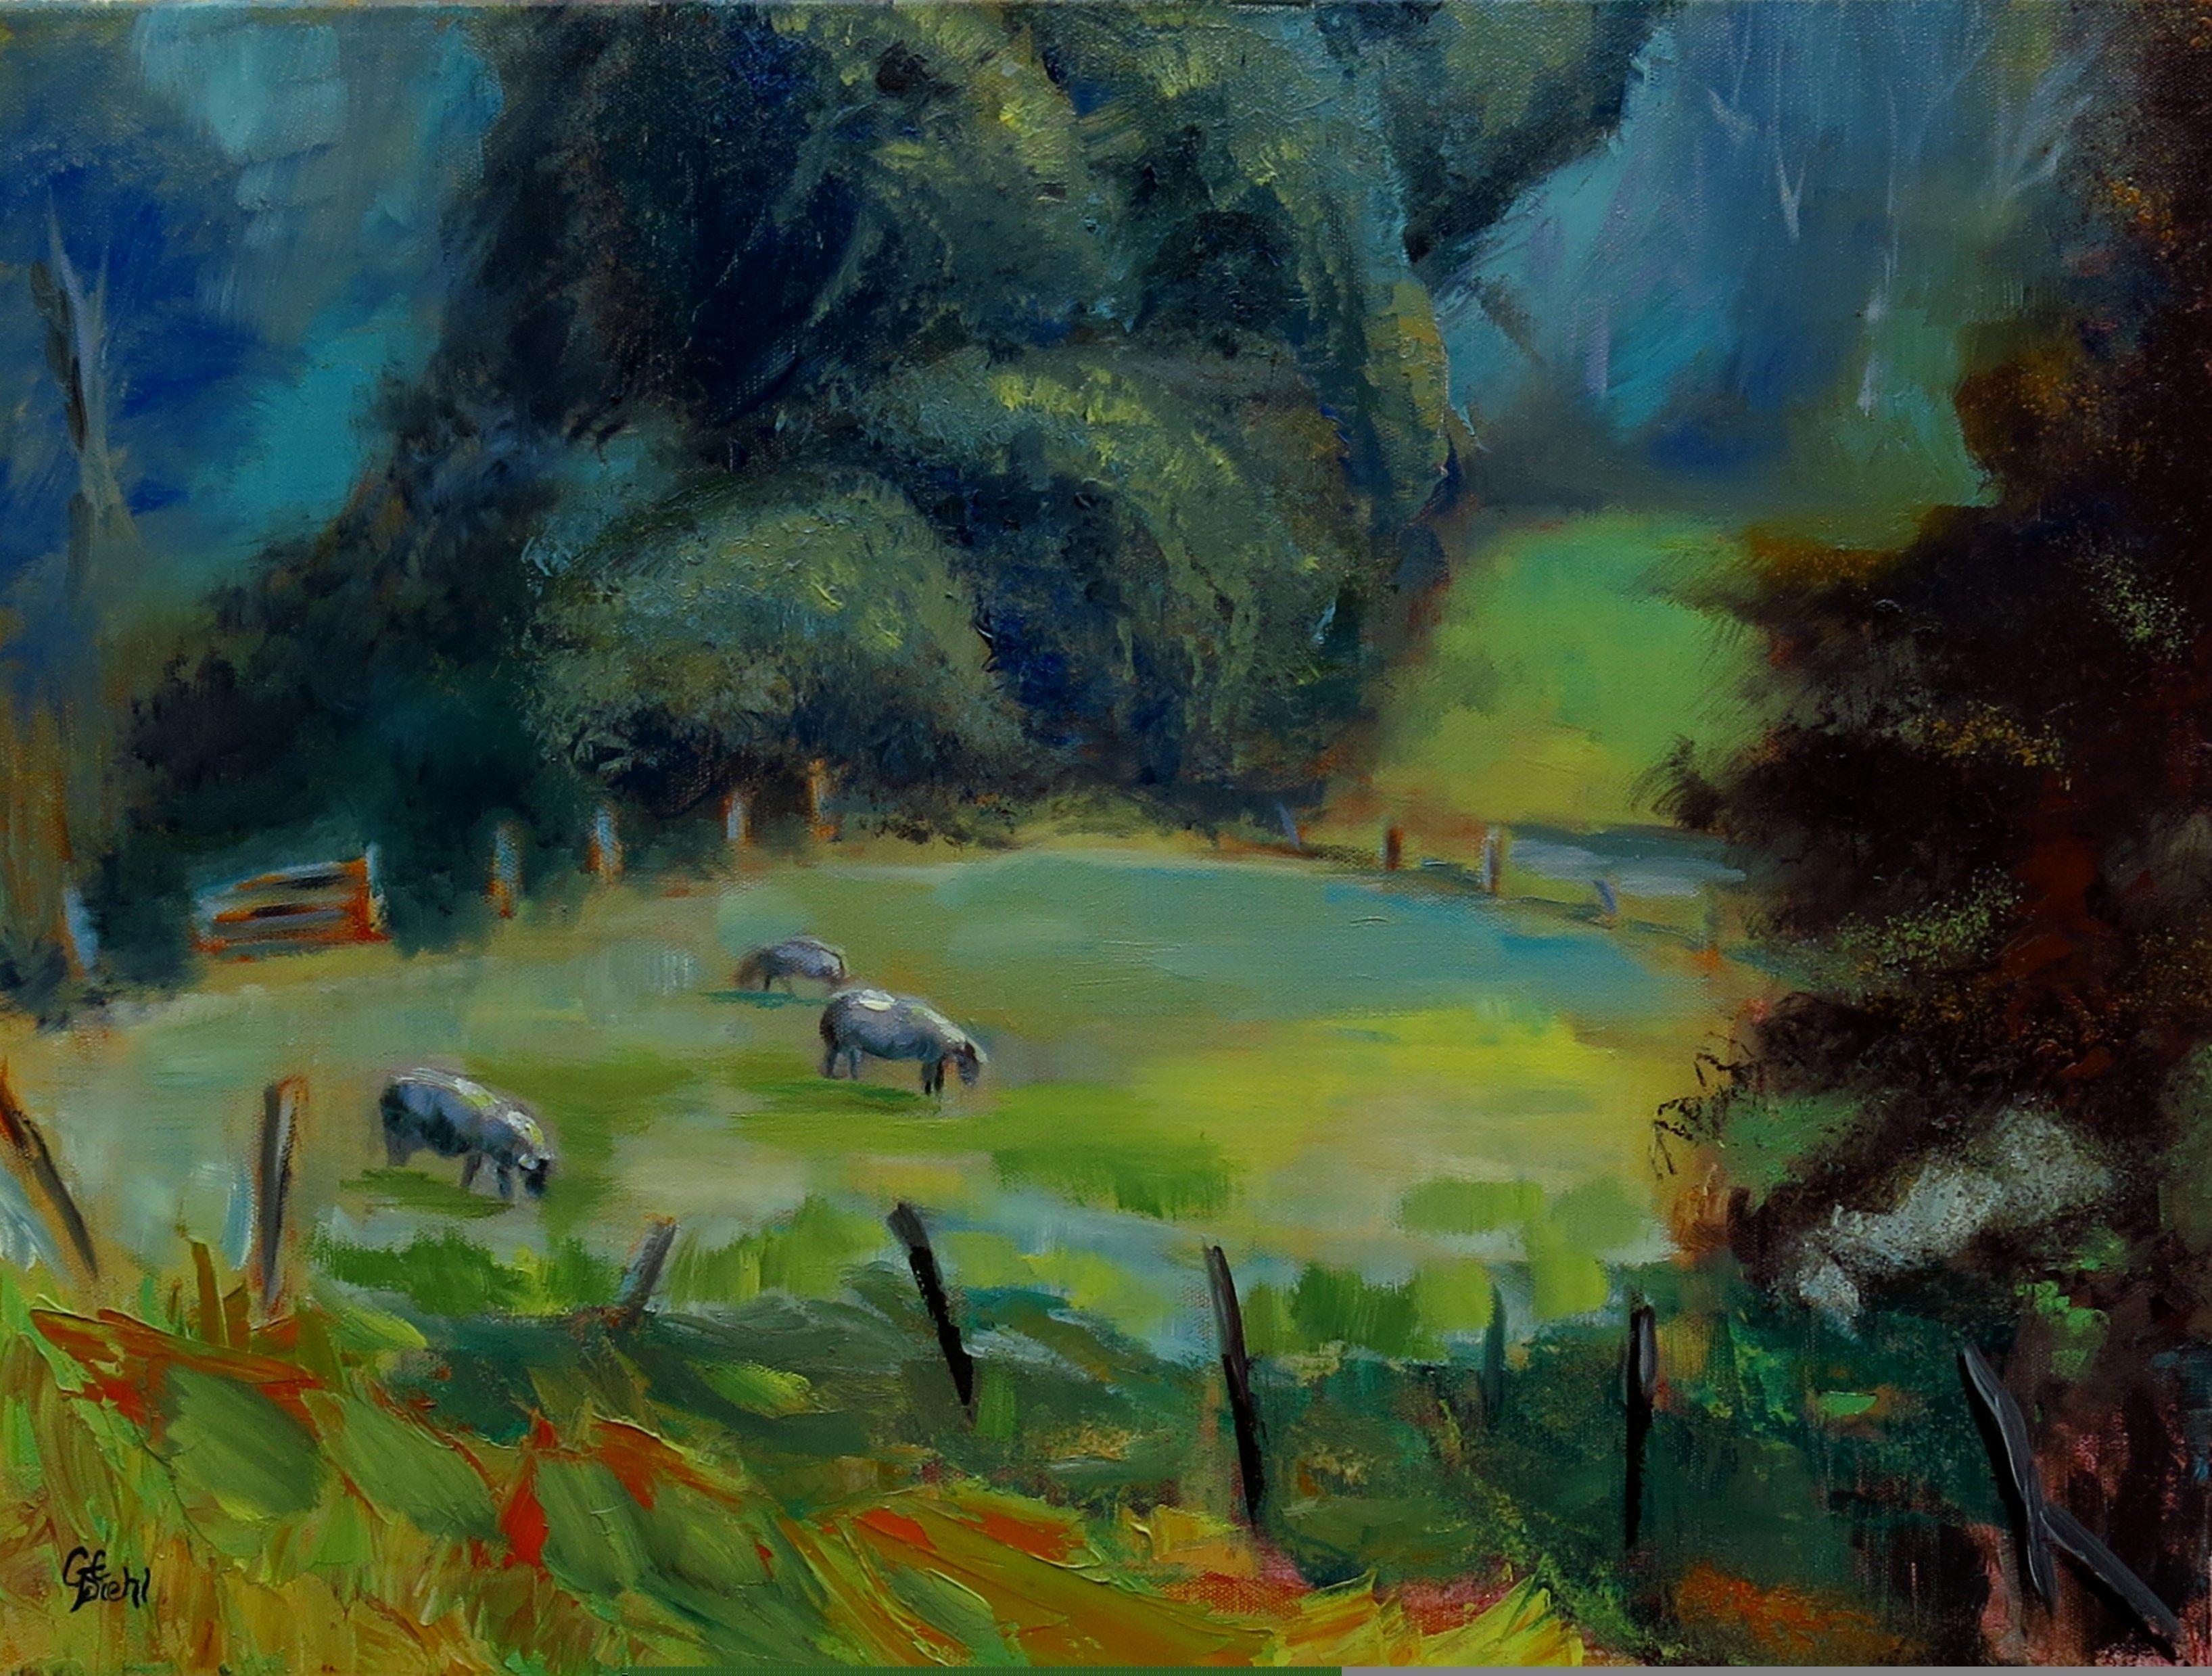 This scene was taken in the small town of Amenia, NY. Upon a visit, I came across this country area of sheep grazing in a meadow and was inspired to paint it. This original oil painting was produced on a 18"x24" stretched canvas.  This unique piece